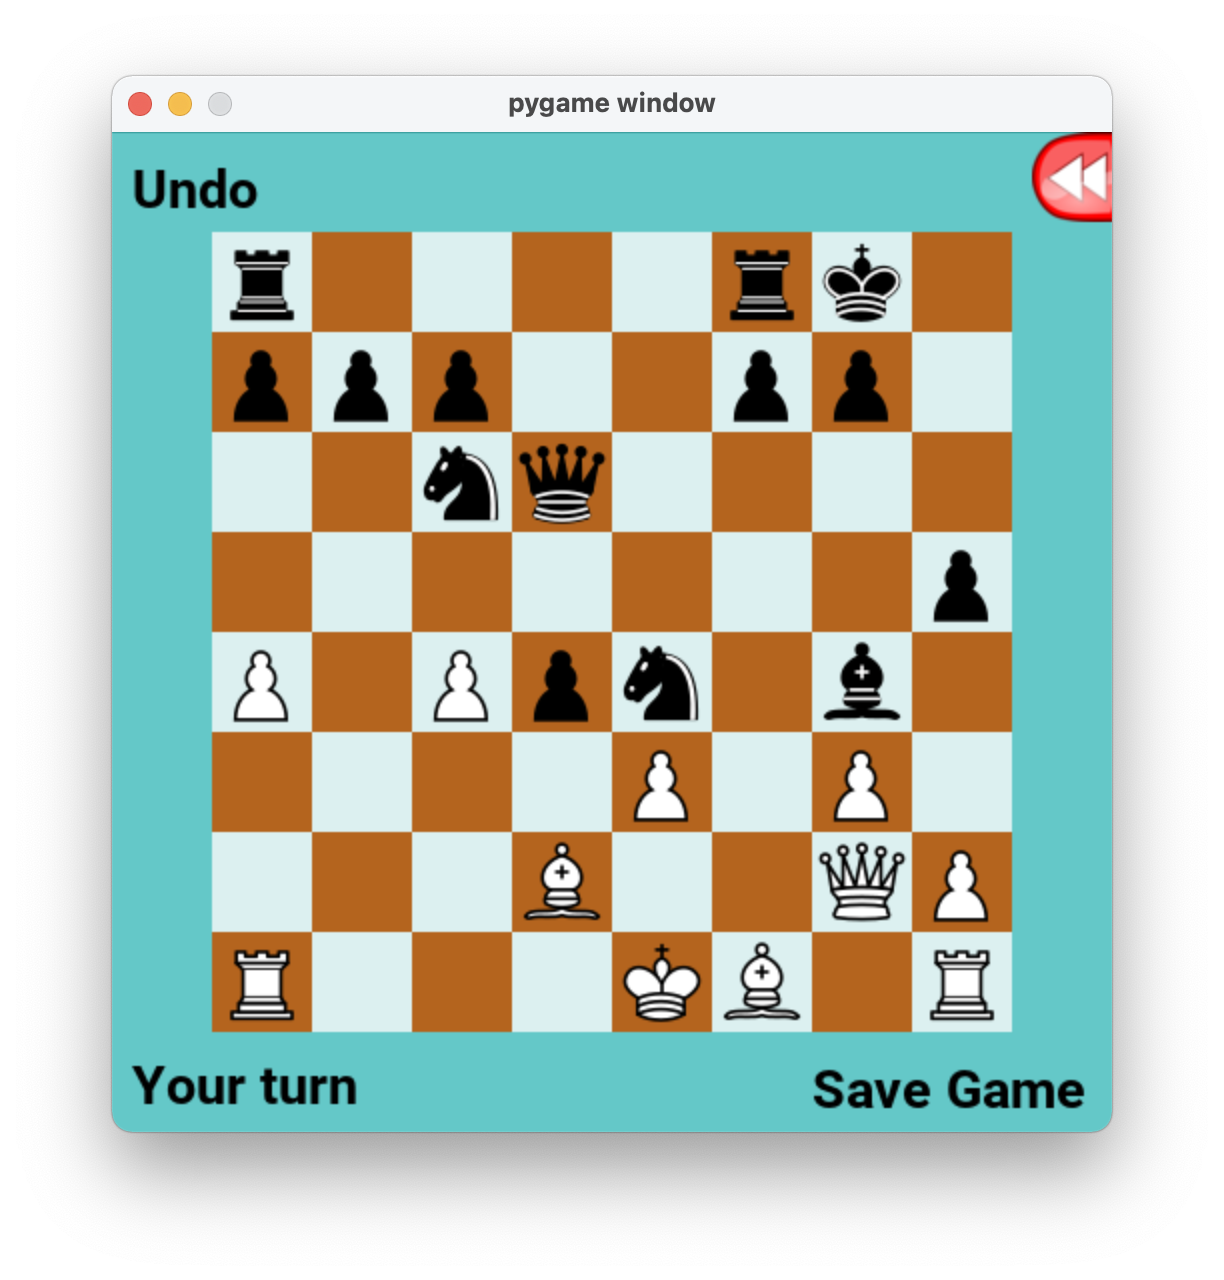 Rooks on Chessboard - Problems and Algorithms